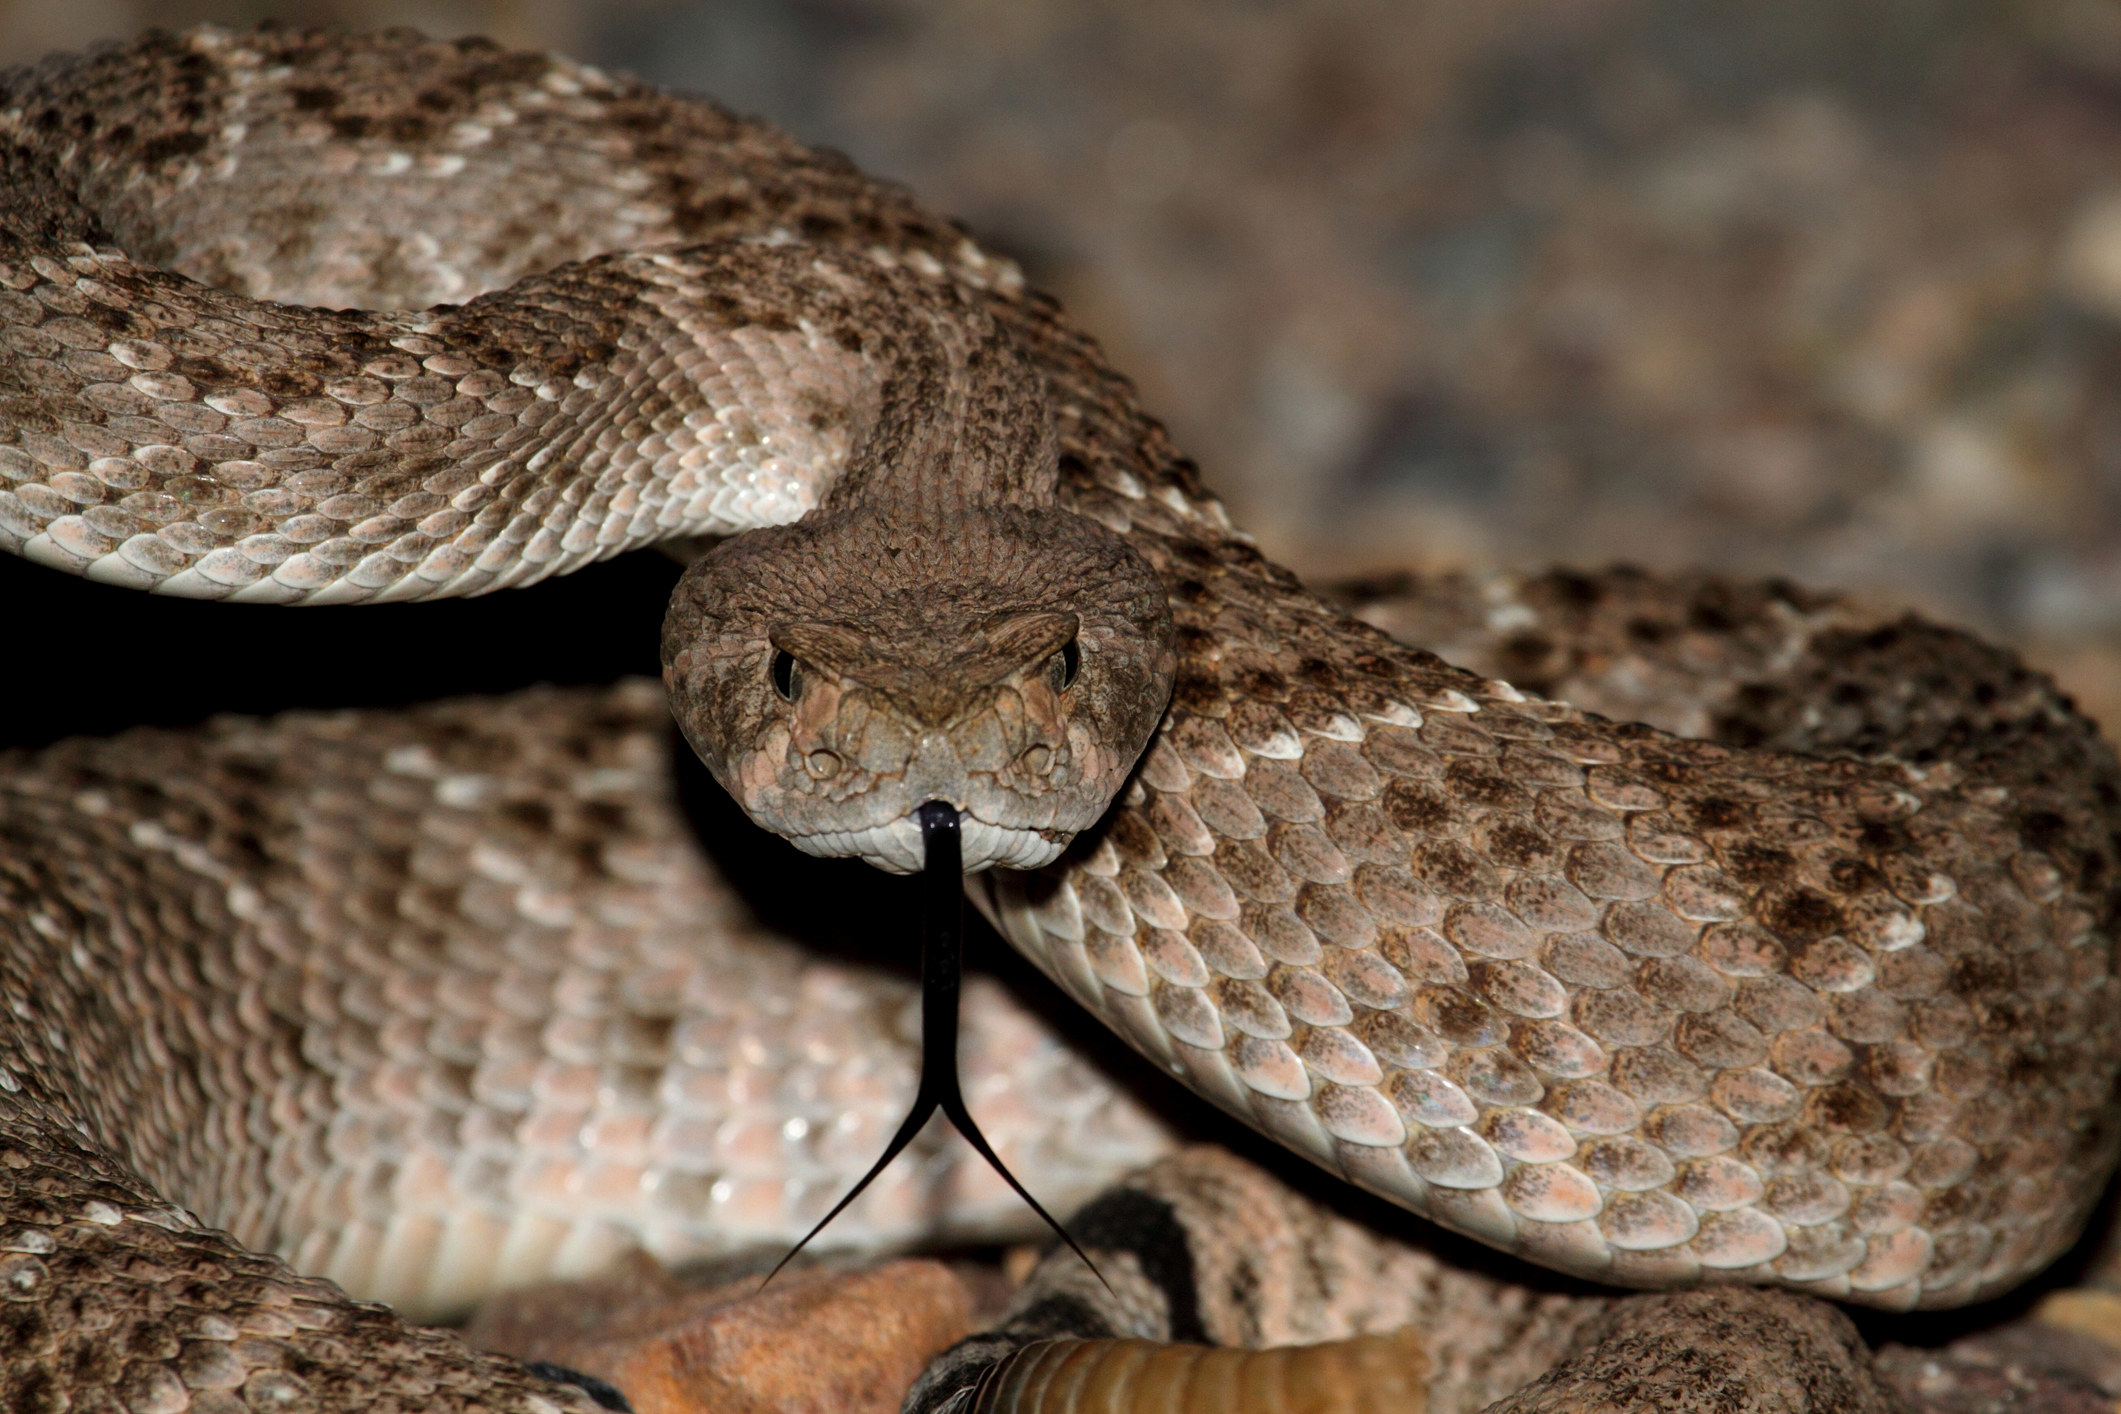 A stock image of a Mojave Rattlesnake coiled to strike